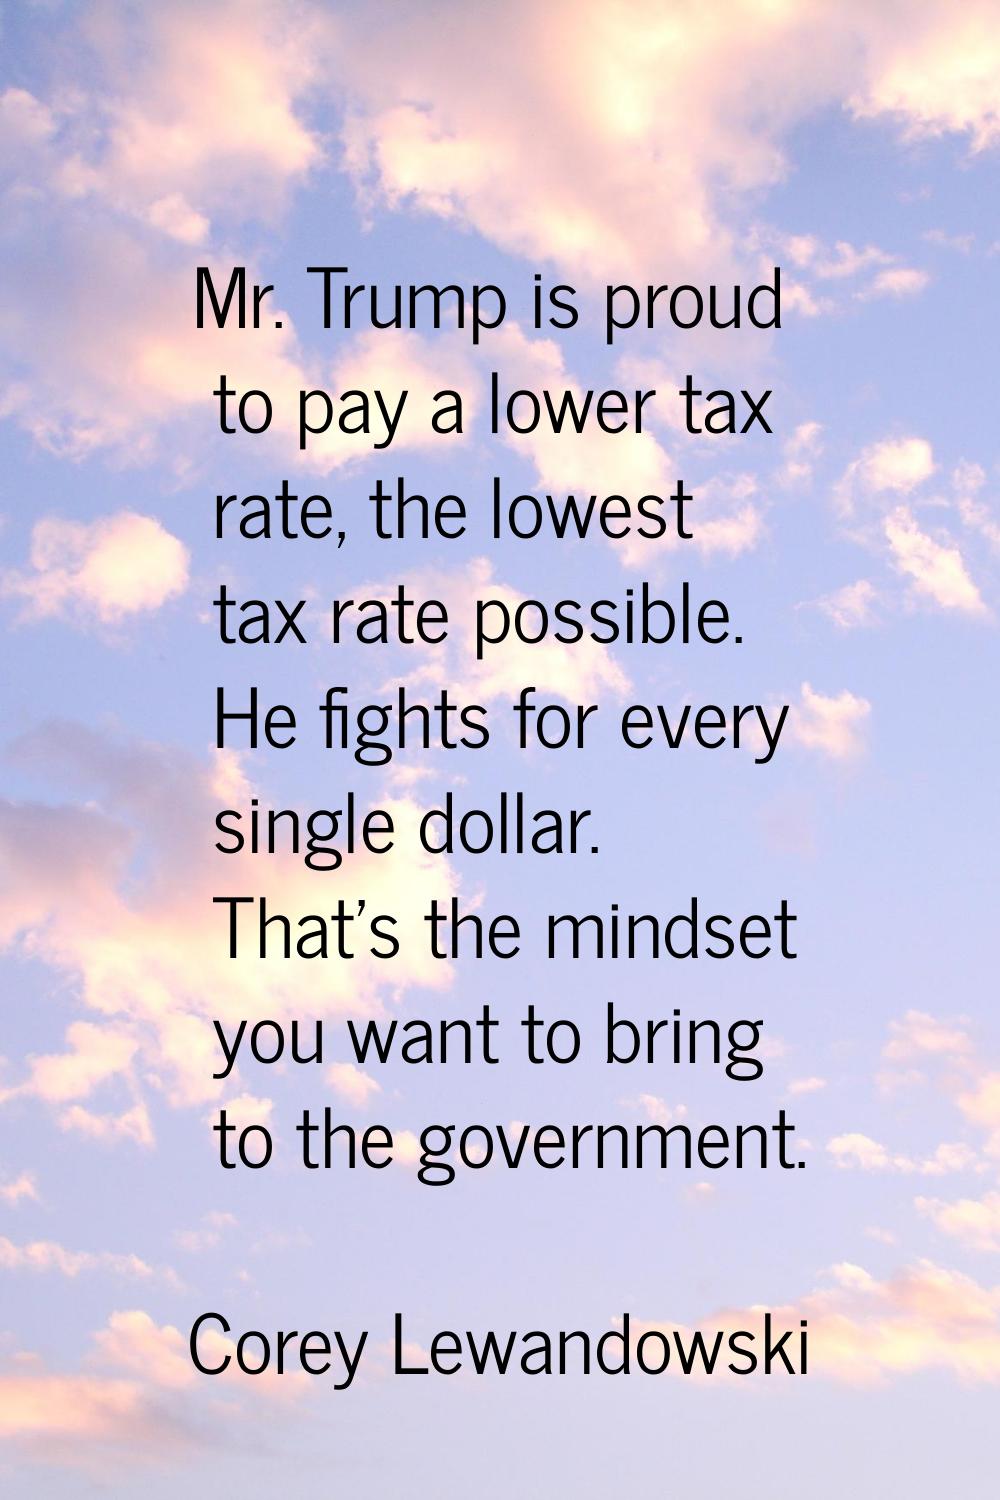 Mr. Trump is proud to pay a lower tax rate, the lowest tax rate possible. He fights for every singl